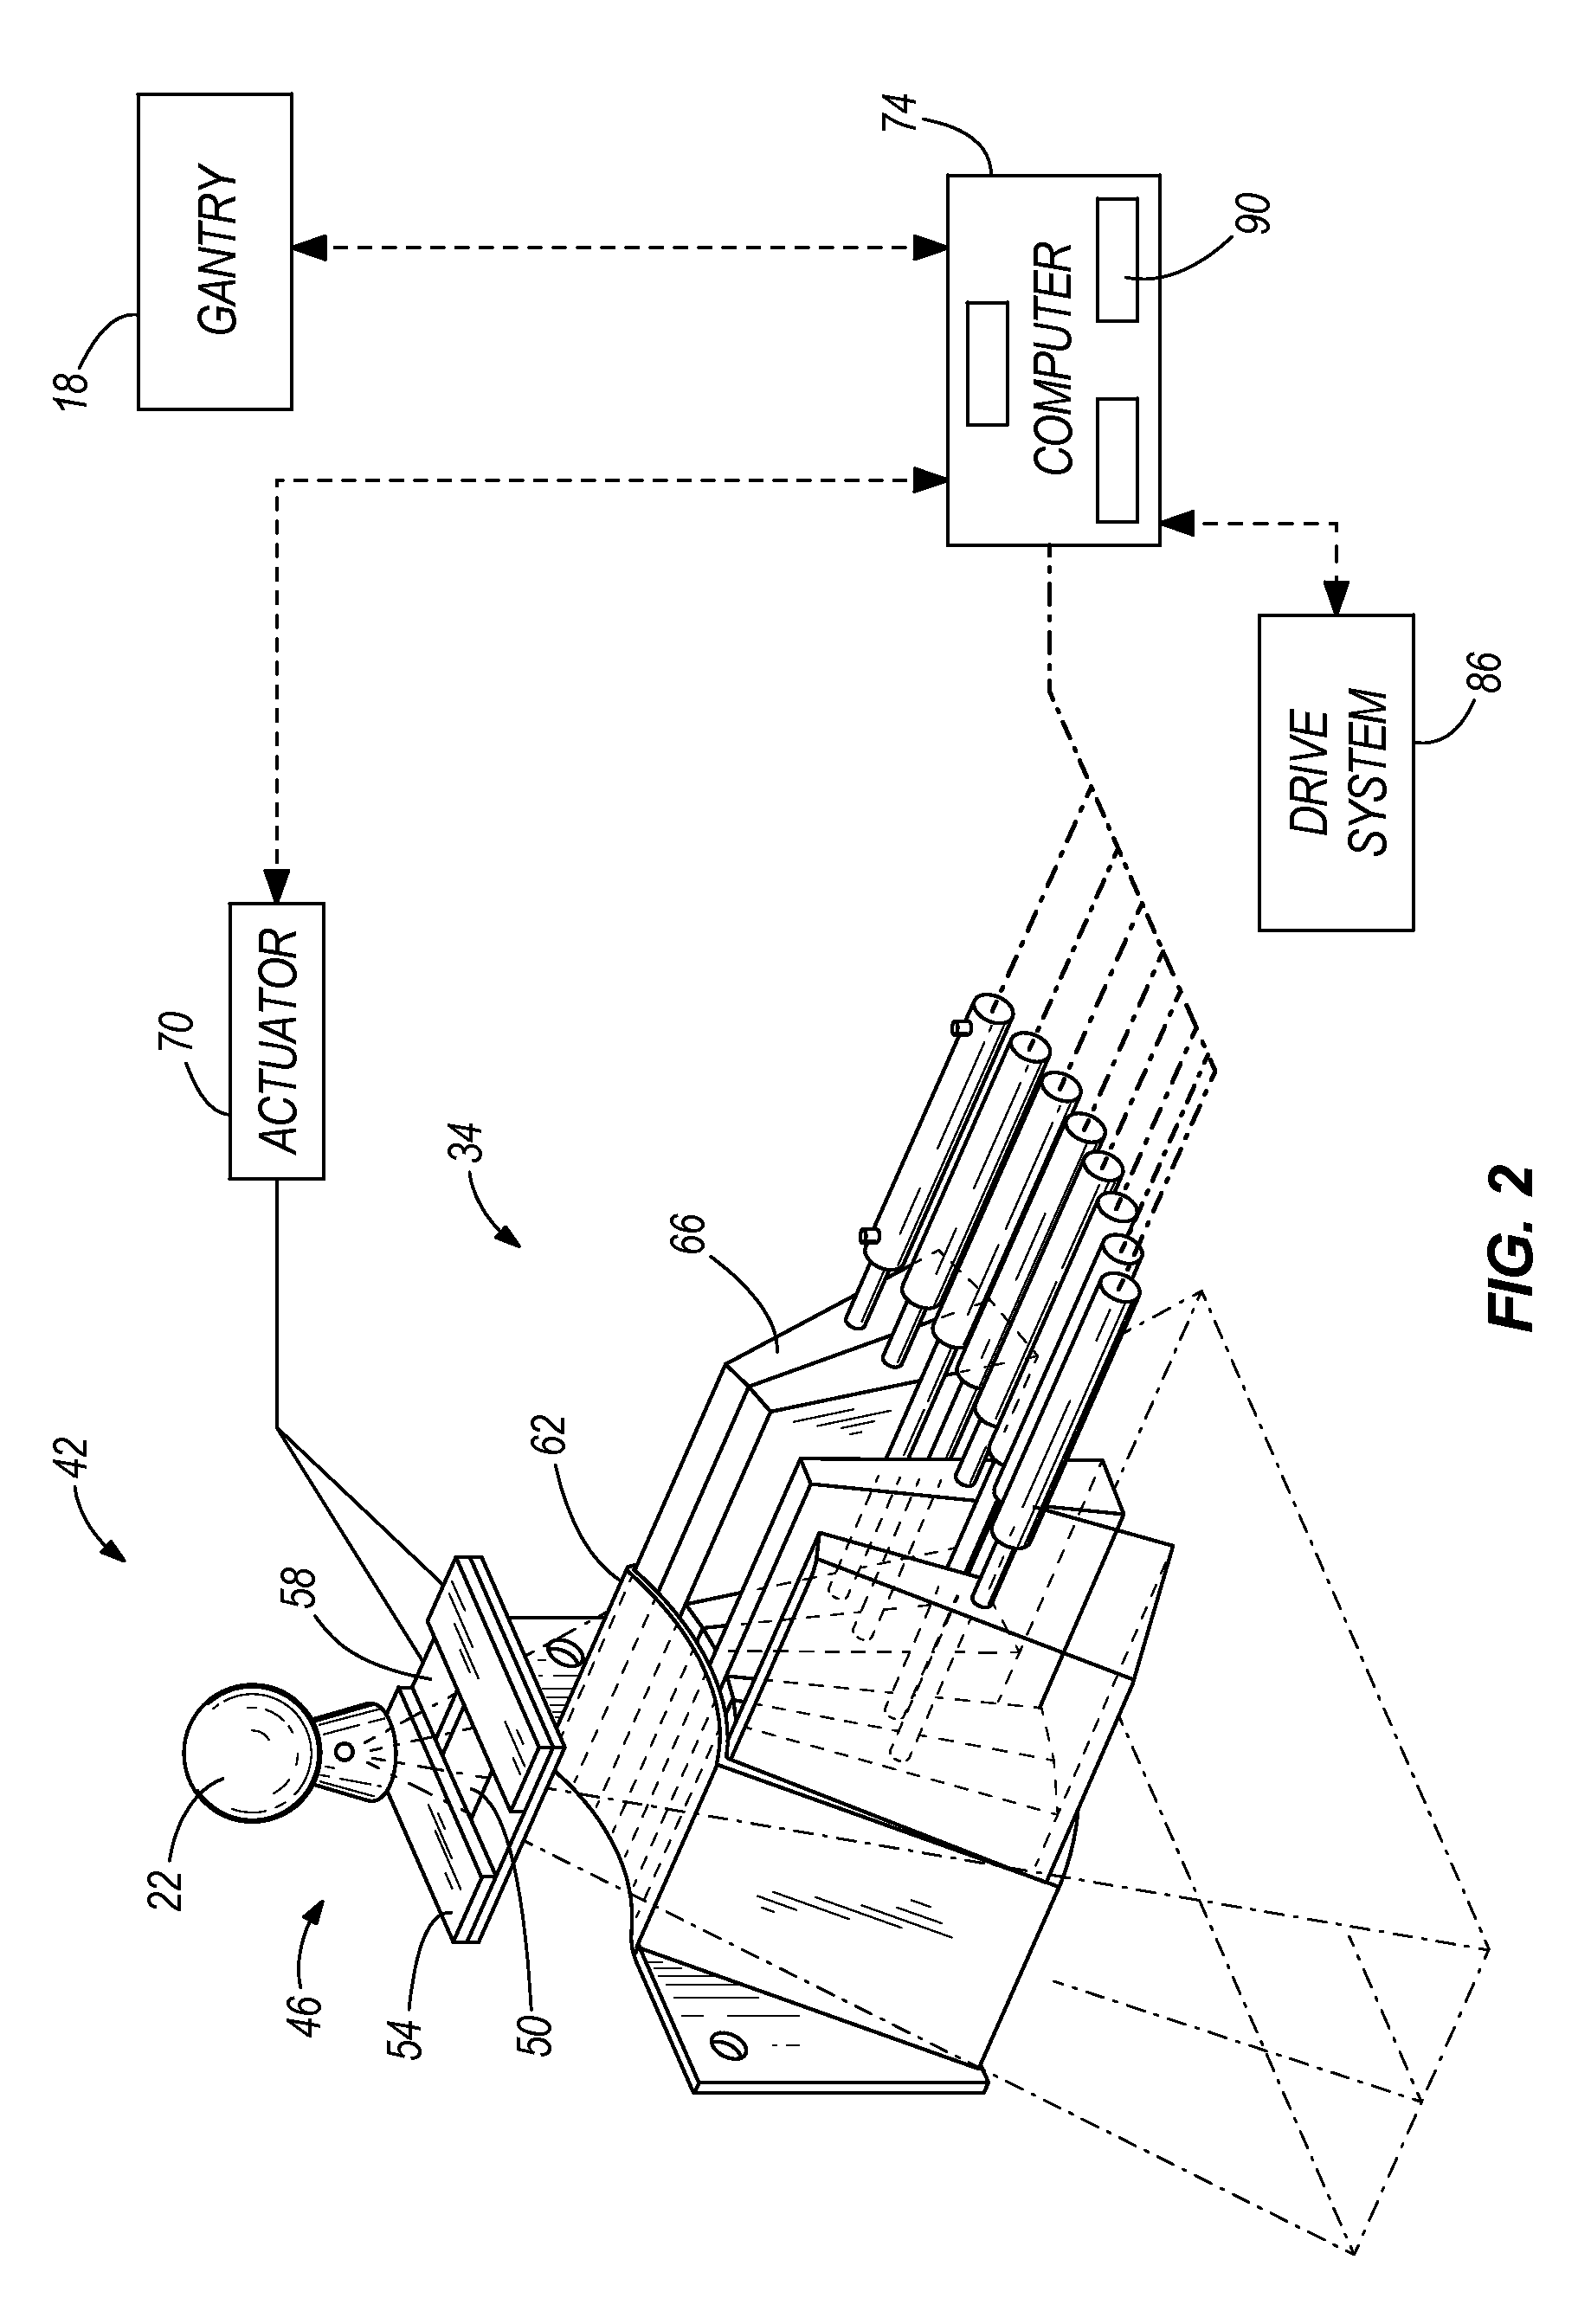 Patient support device with low attenuation properties